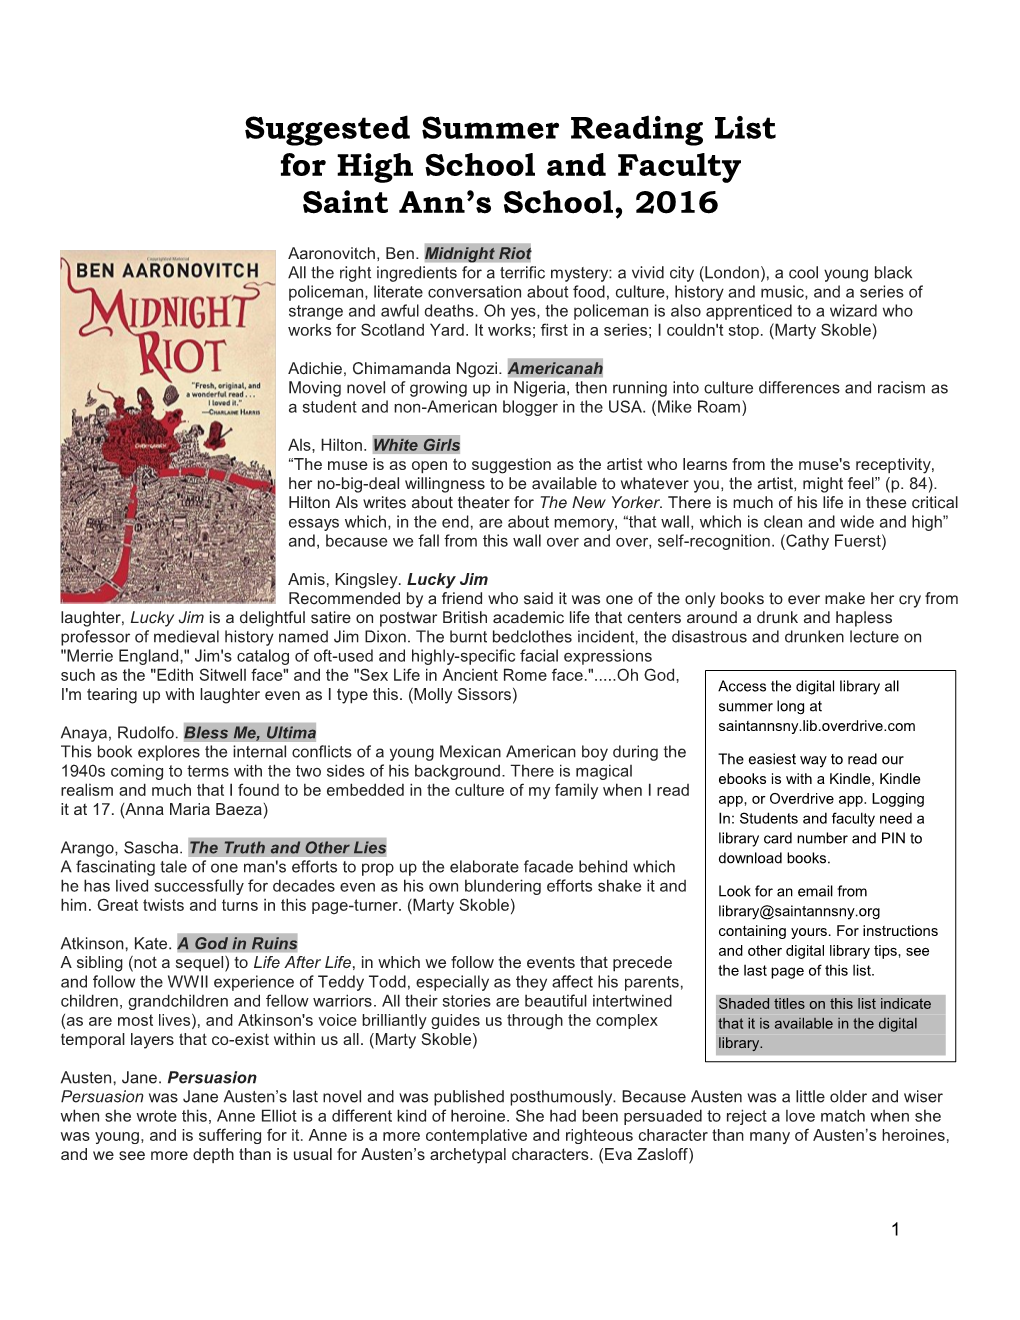 Suggested Summer Reading List for High School and Faculty Saint Ann’S School, 2016